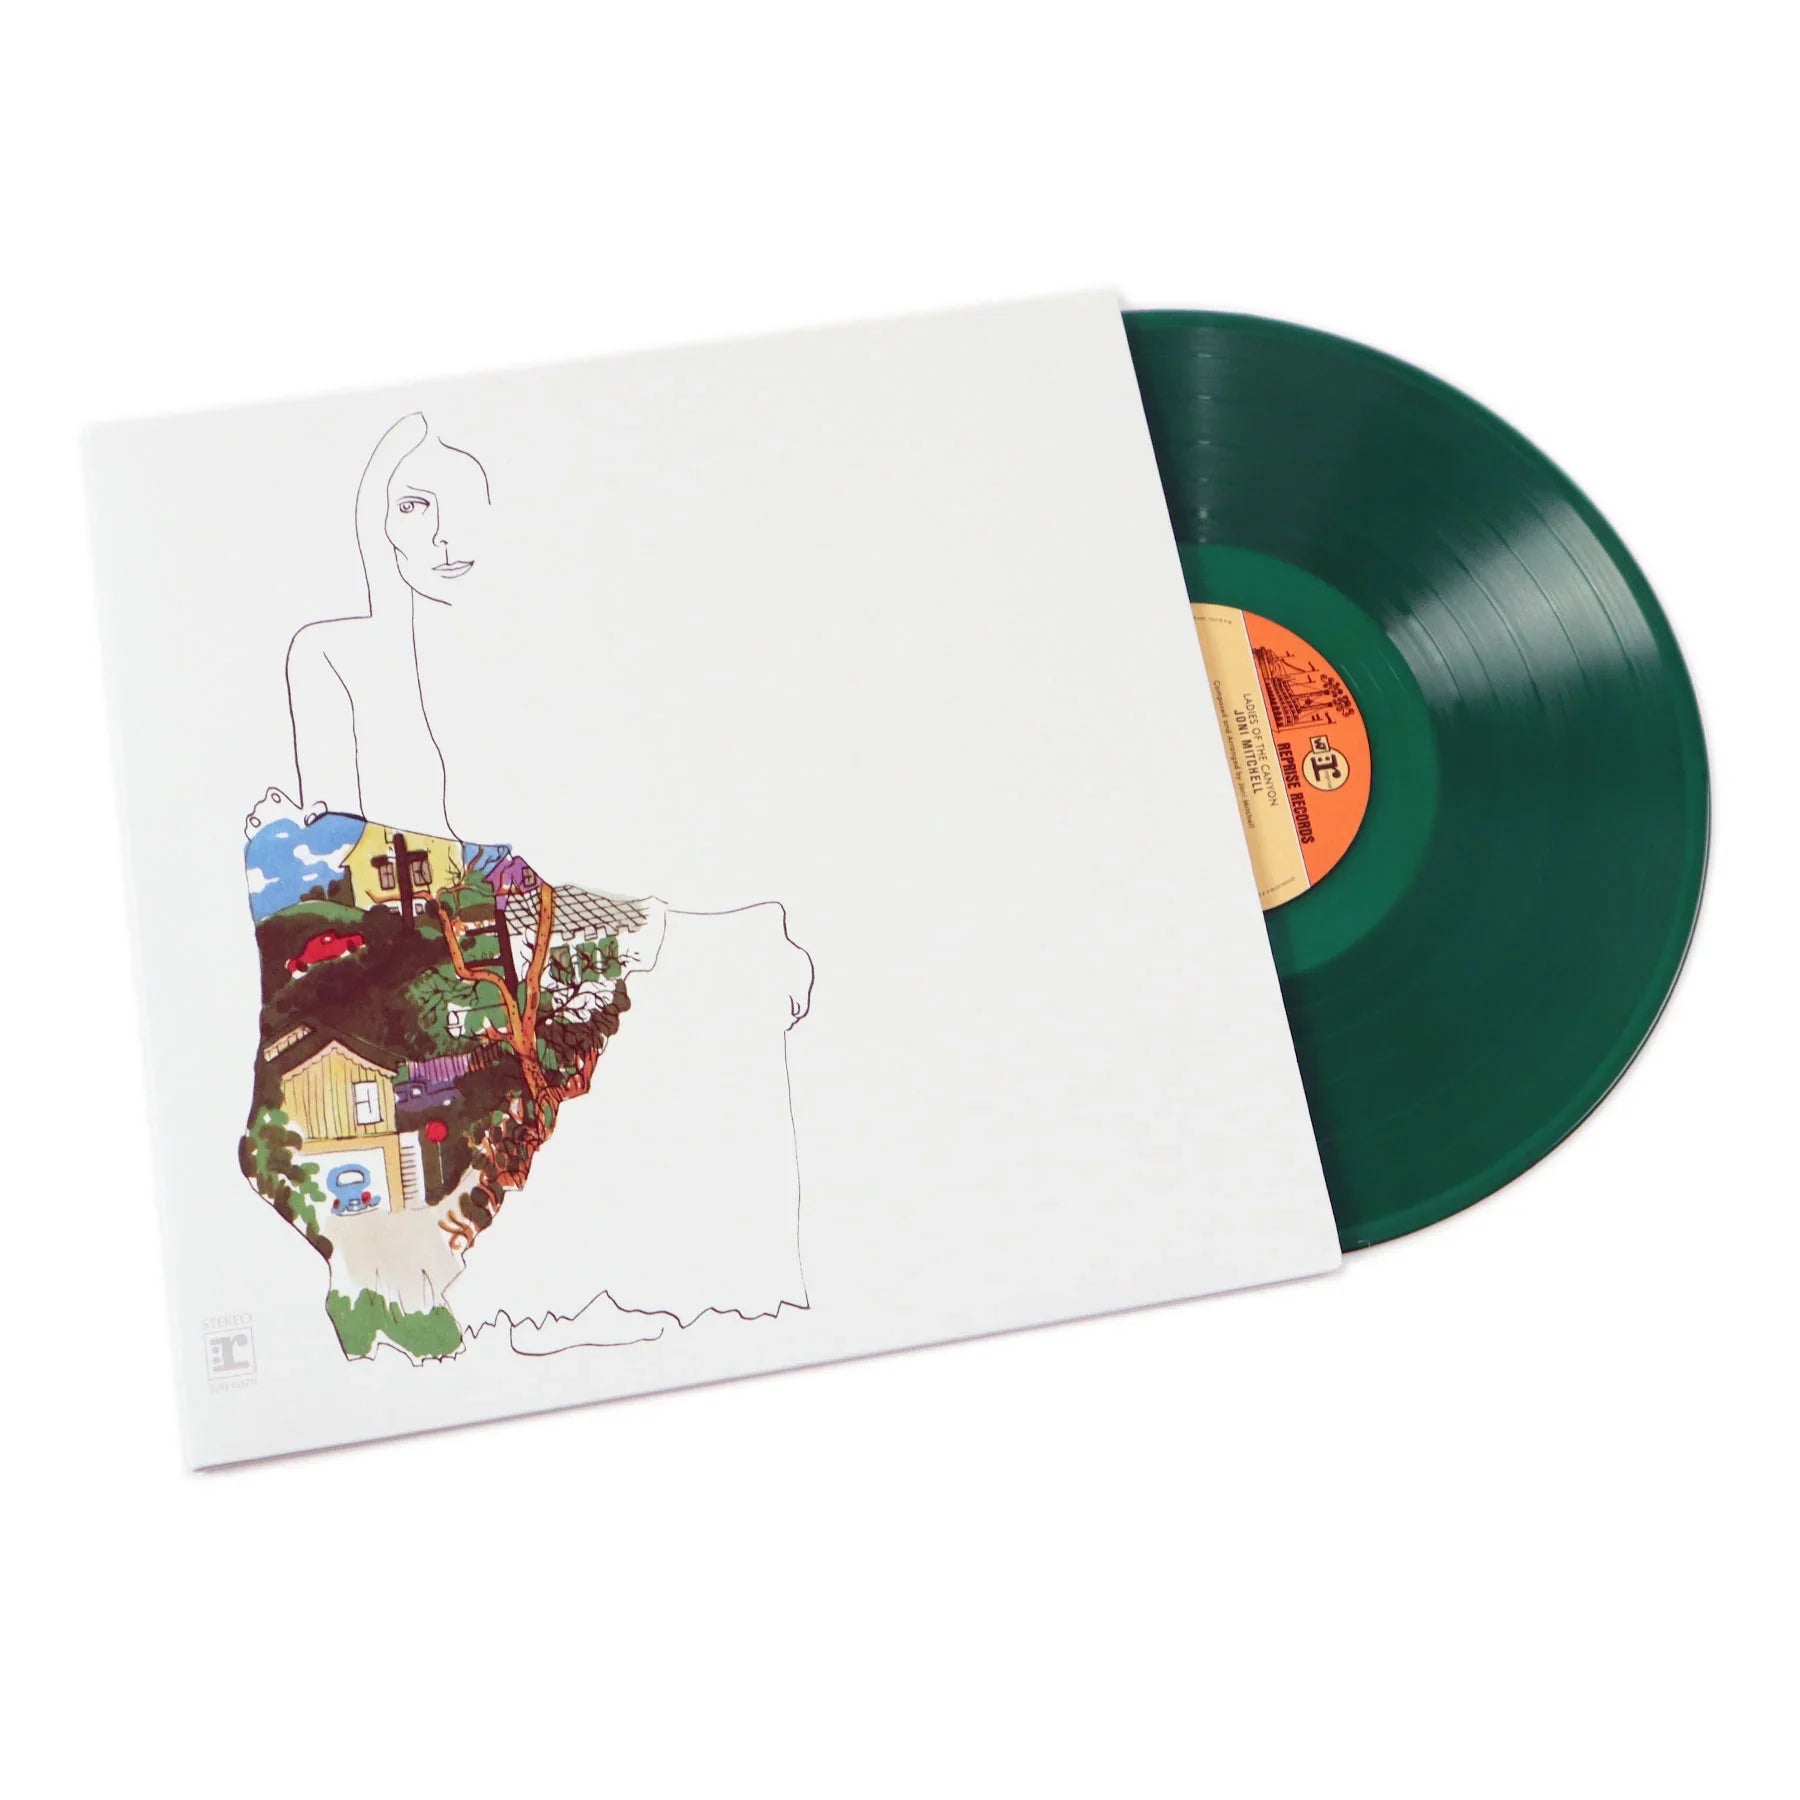 Joni Mitchell - Ladies Of The Canyon [LP] Limited Green Colored Vinyl